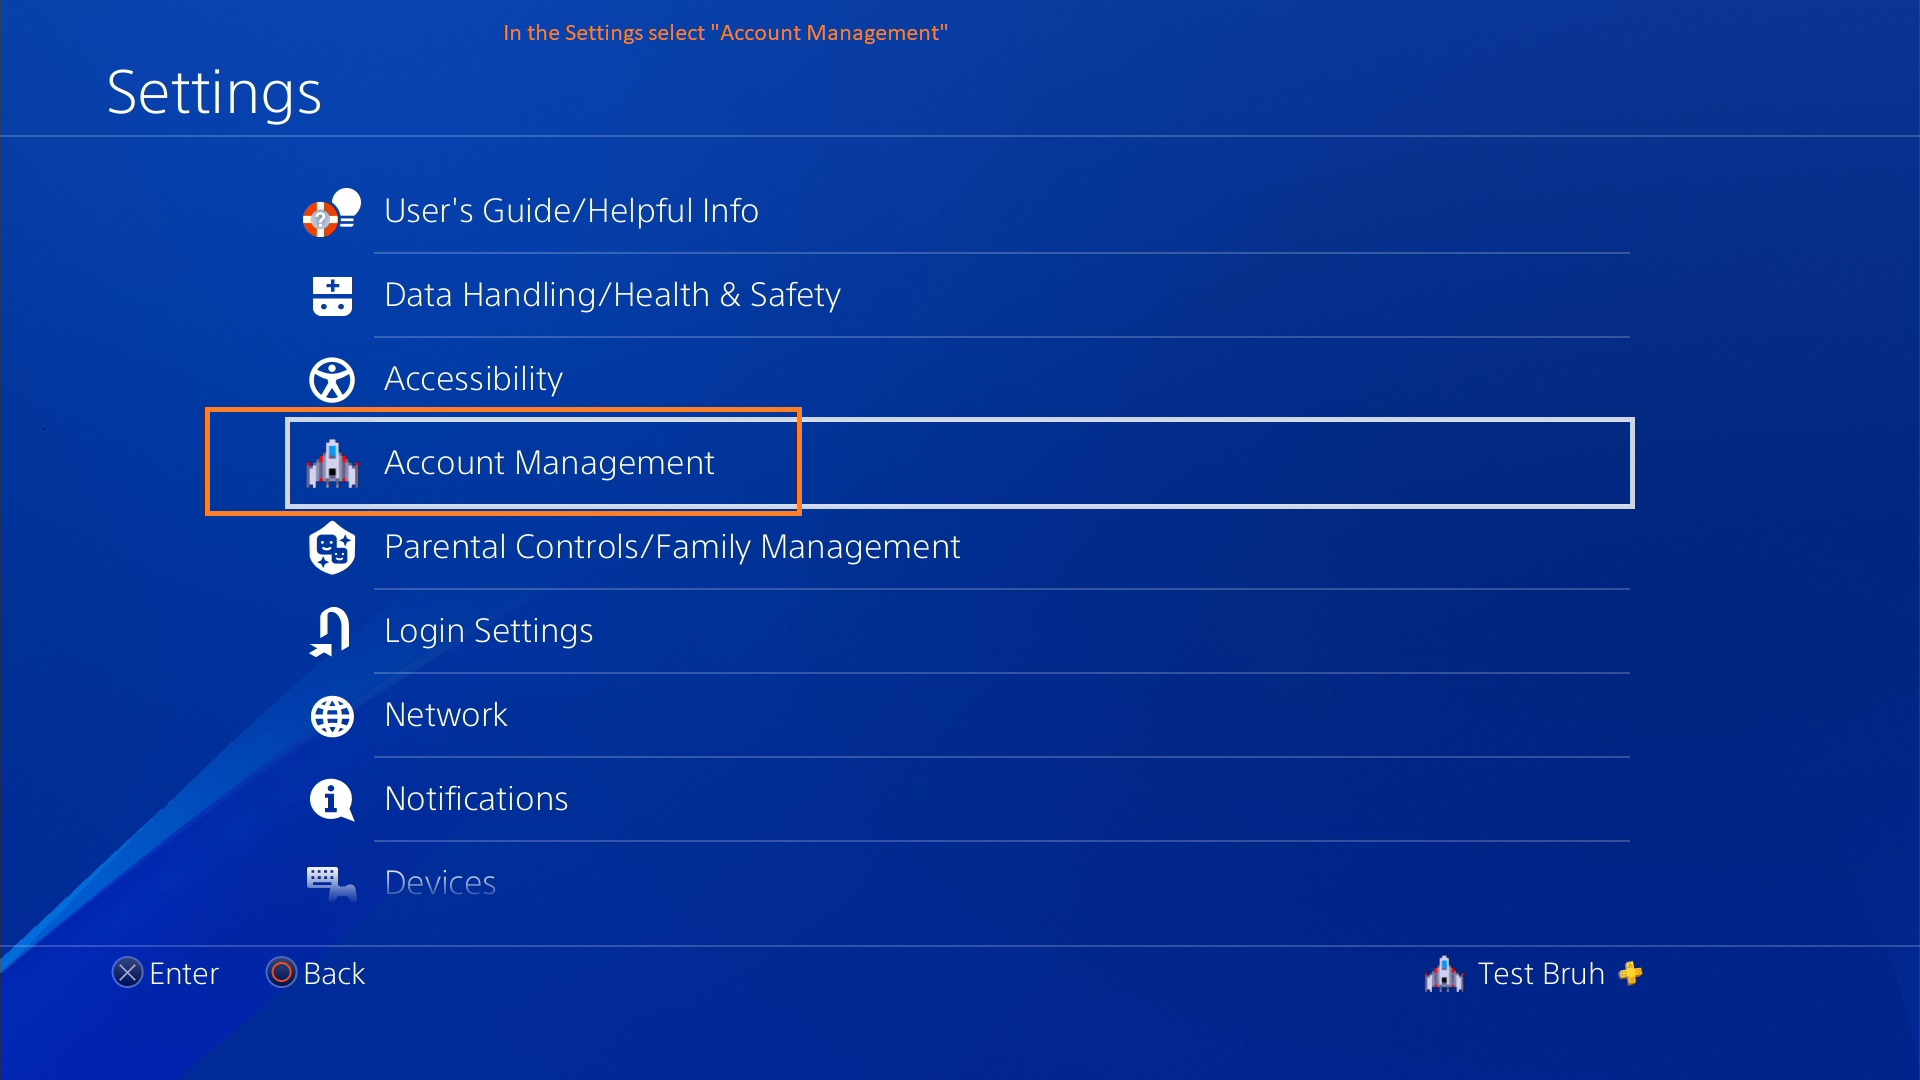 Log-in to your PSN account.